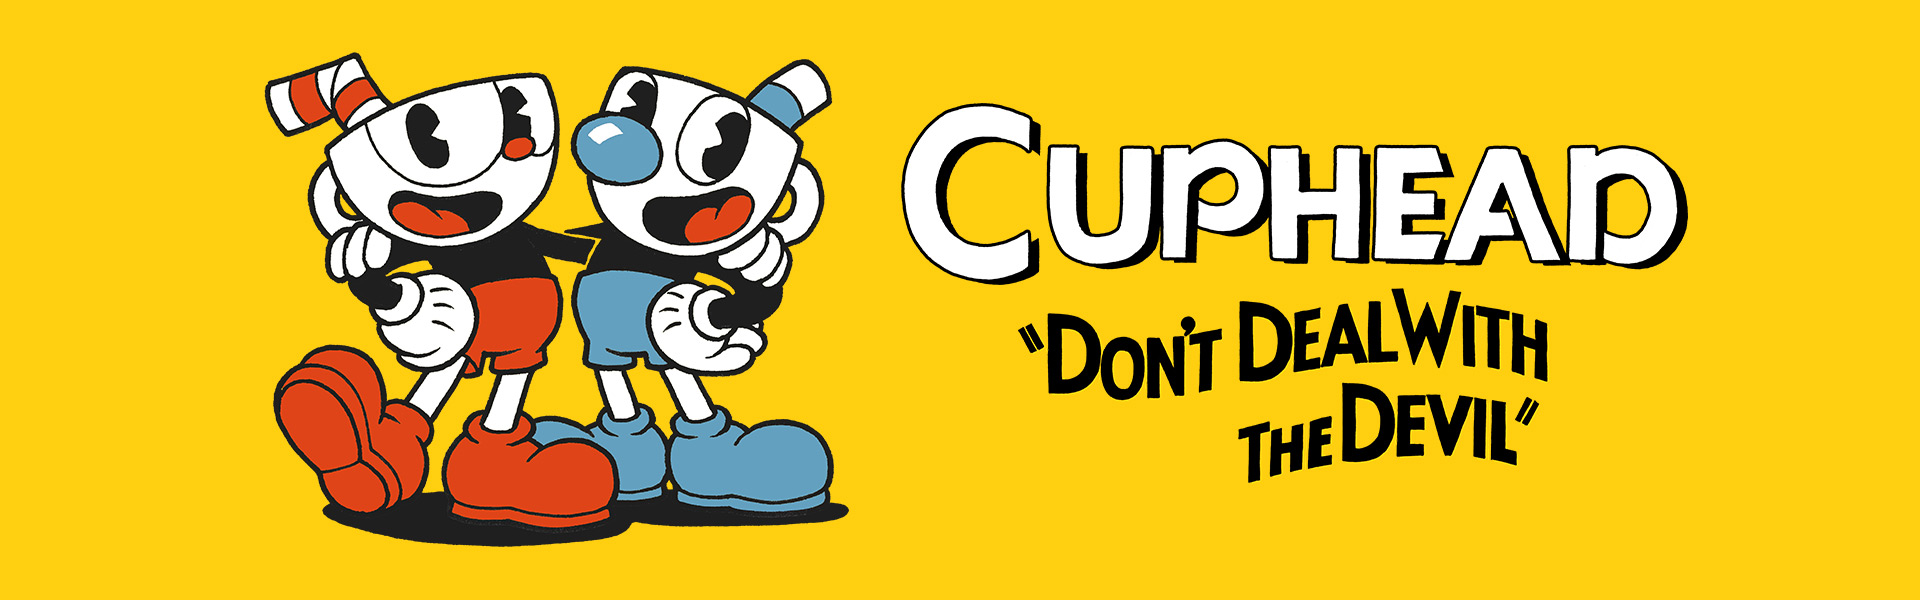 cuphead for a toshiba game free download